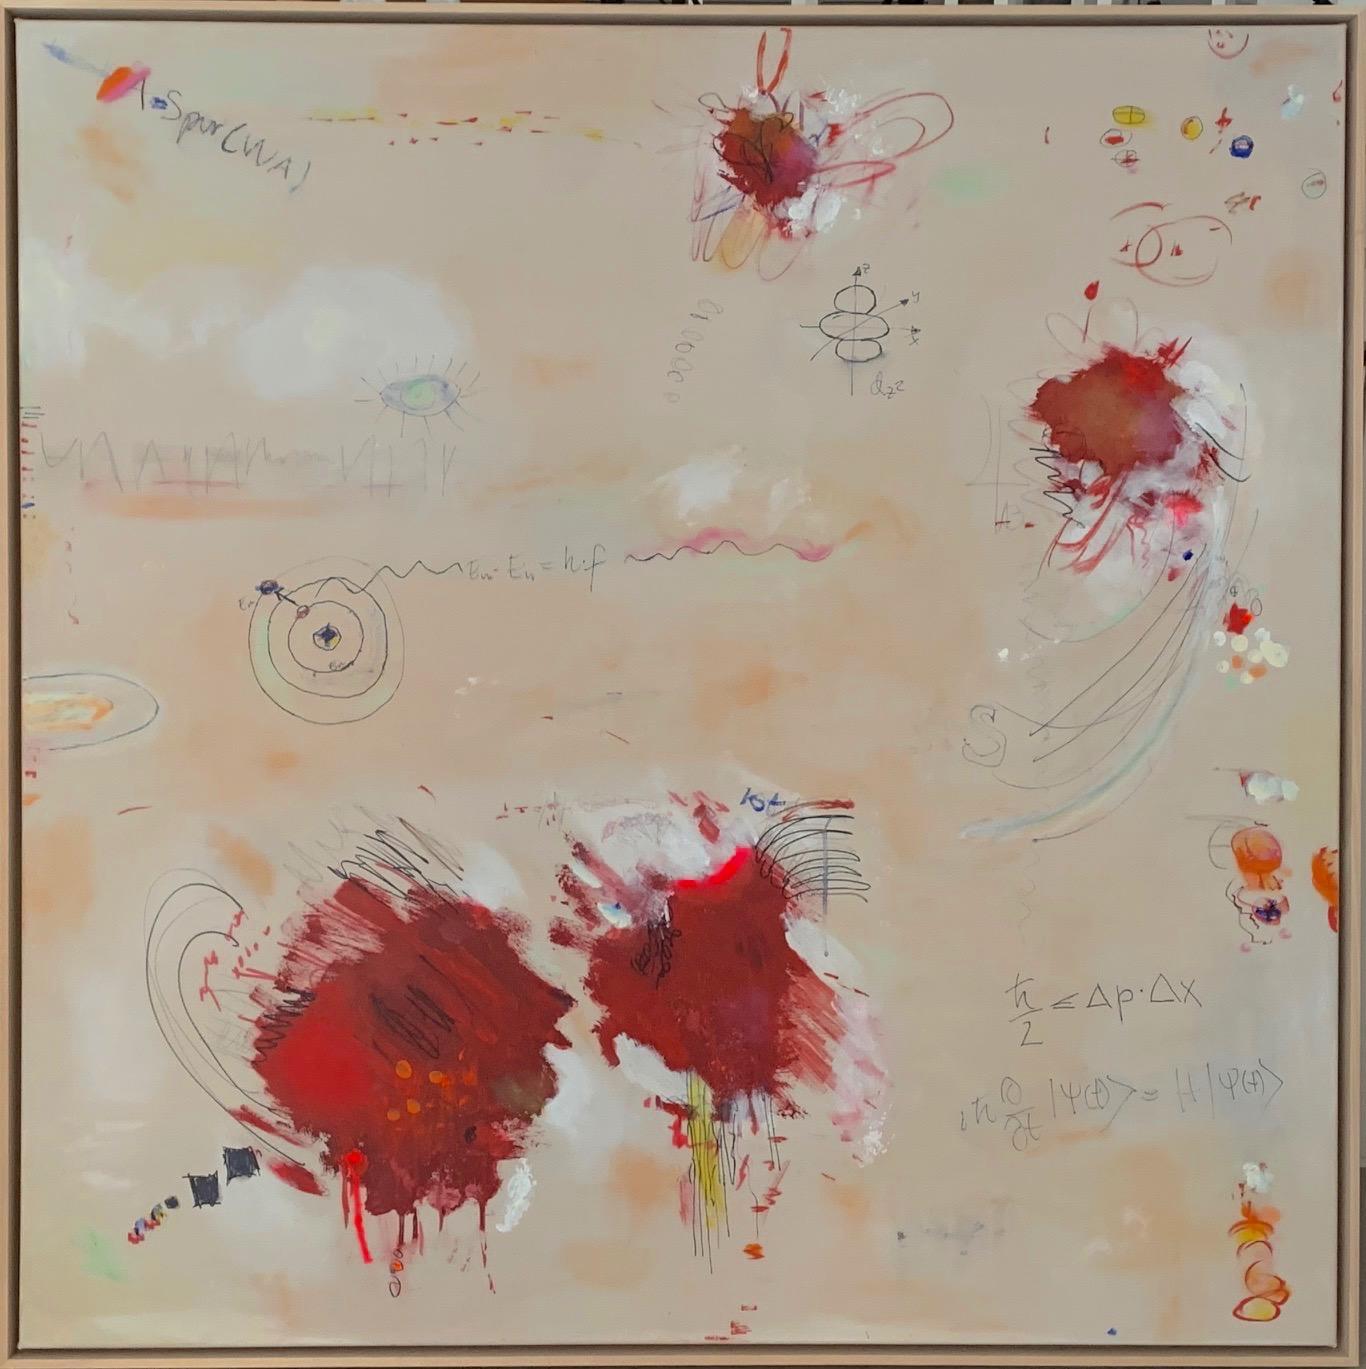 Quantum World - contemporary abstract artwork, playful homage to Cy Twombly 